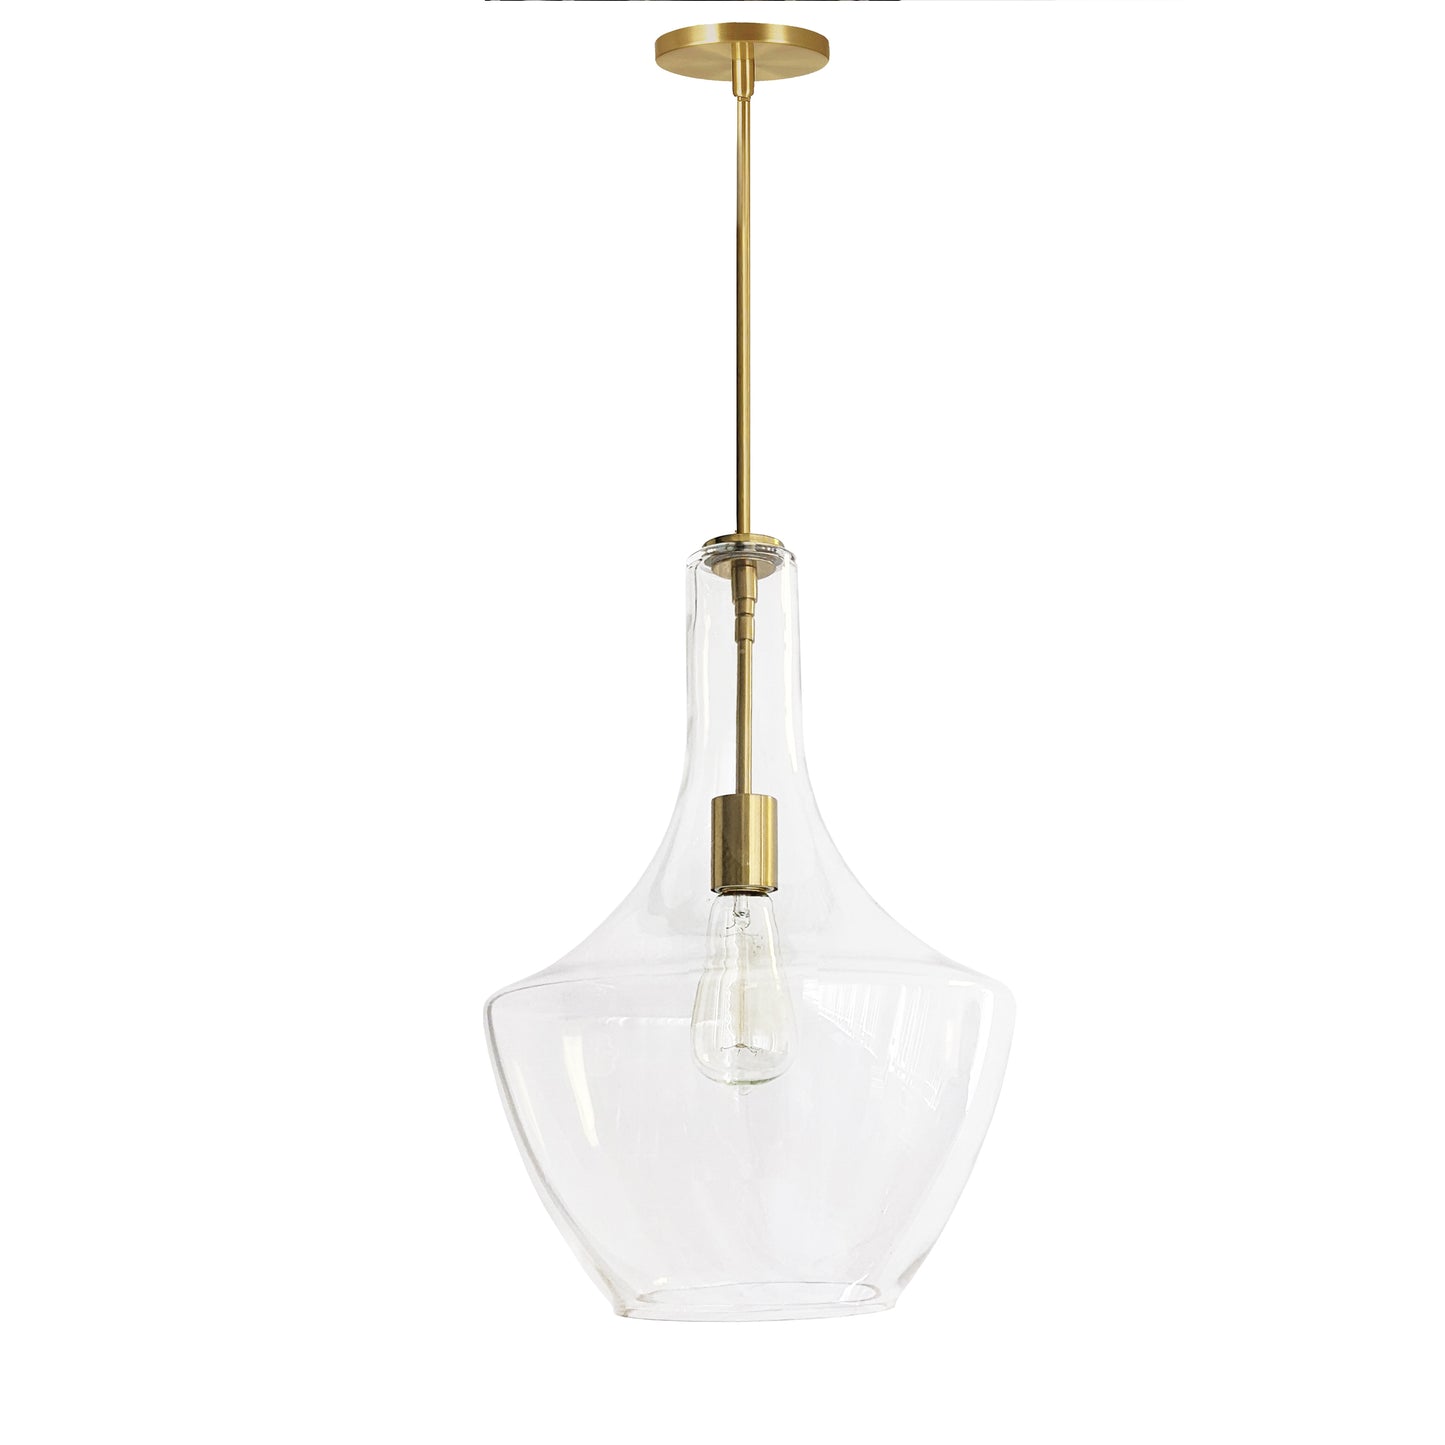 Dainolite PTL-121P-AGB 1 Light Incandescent Pendant, Aged Brass with Clear Glass